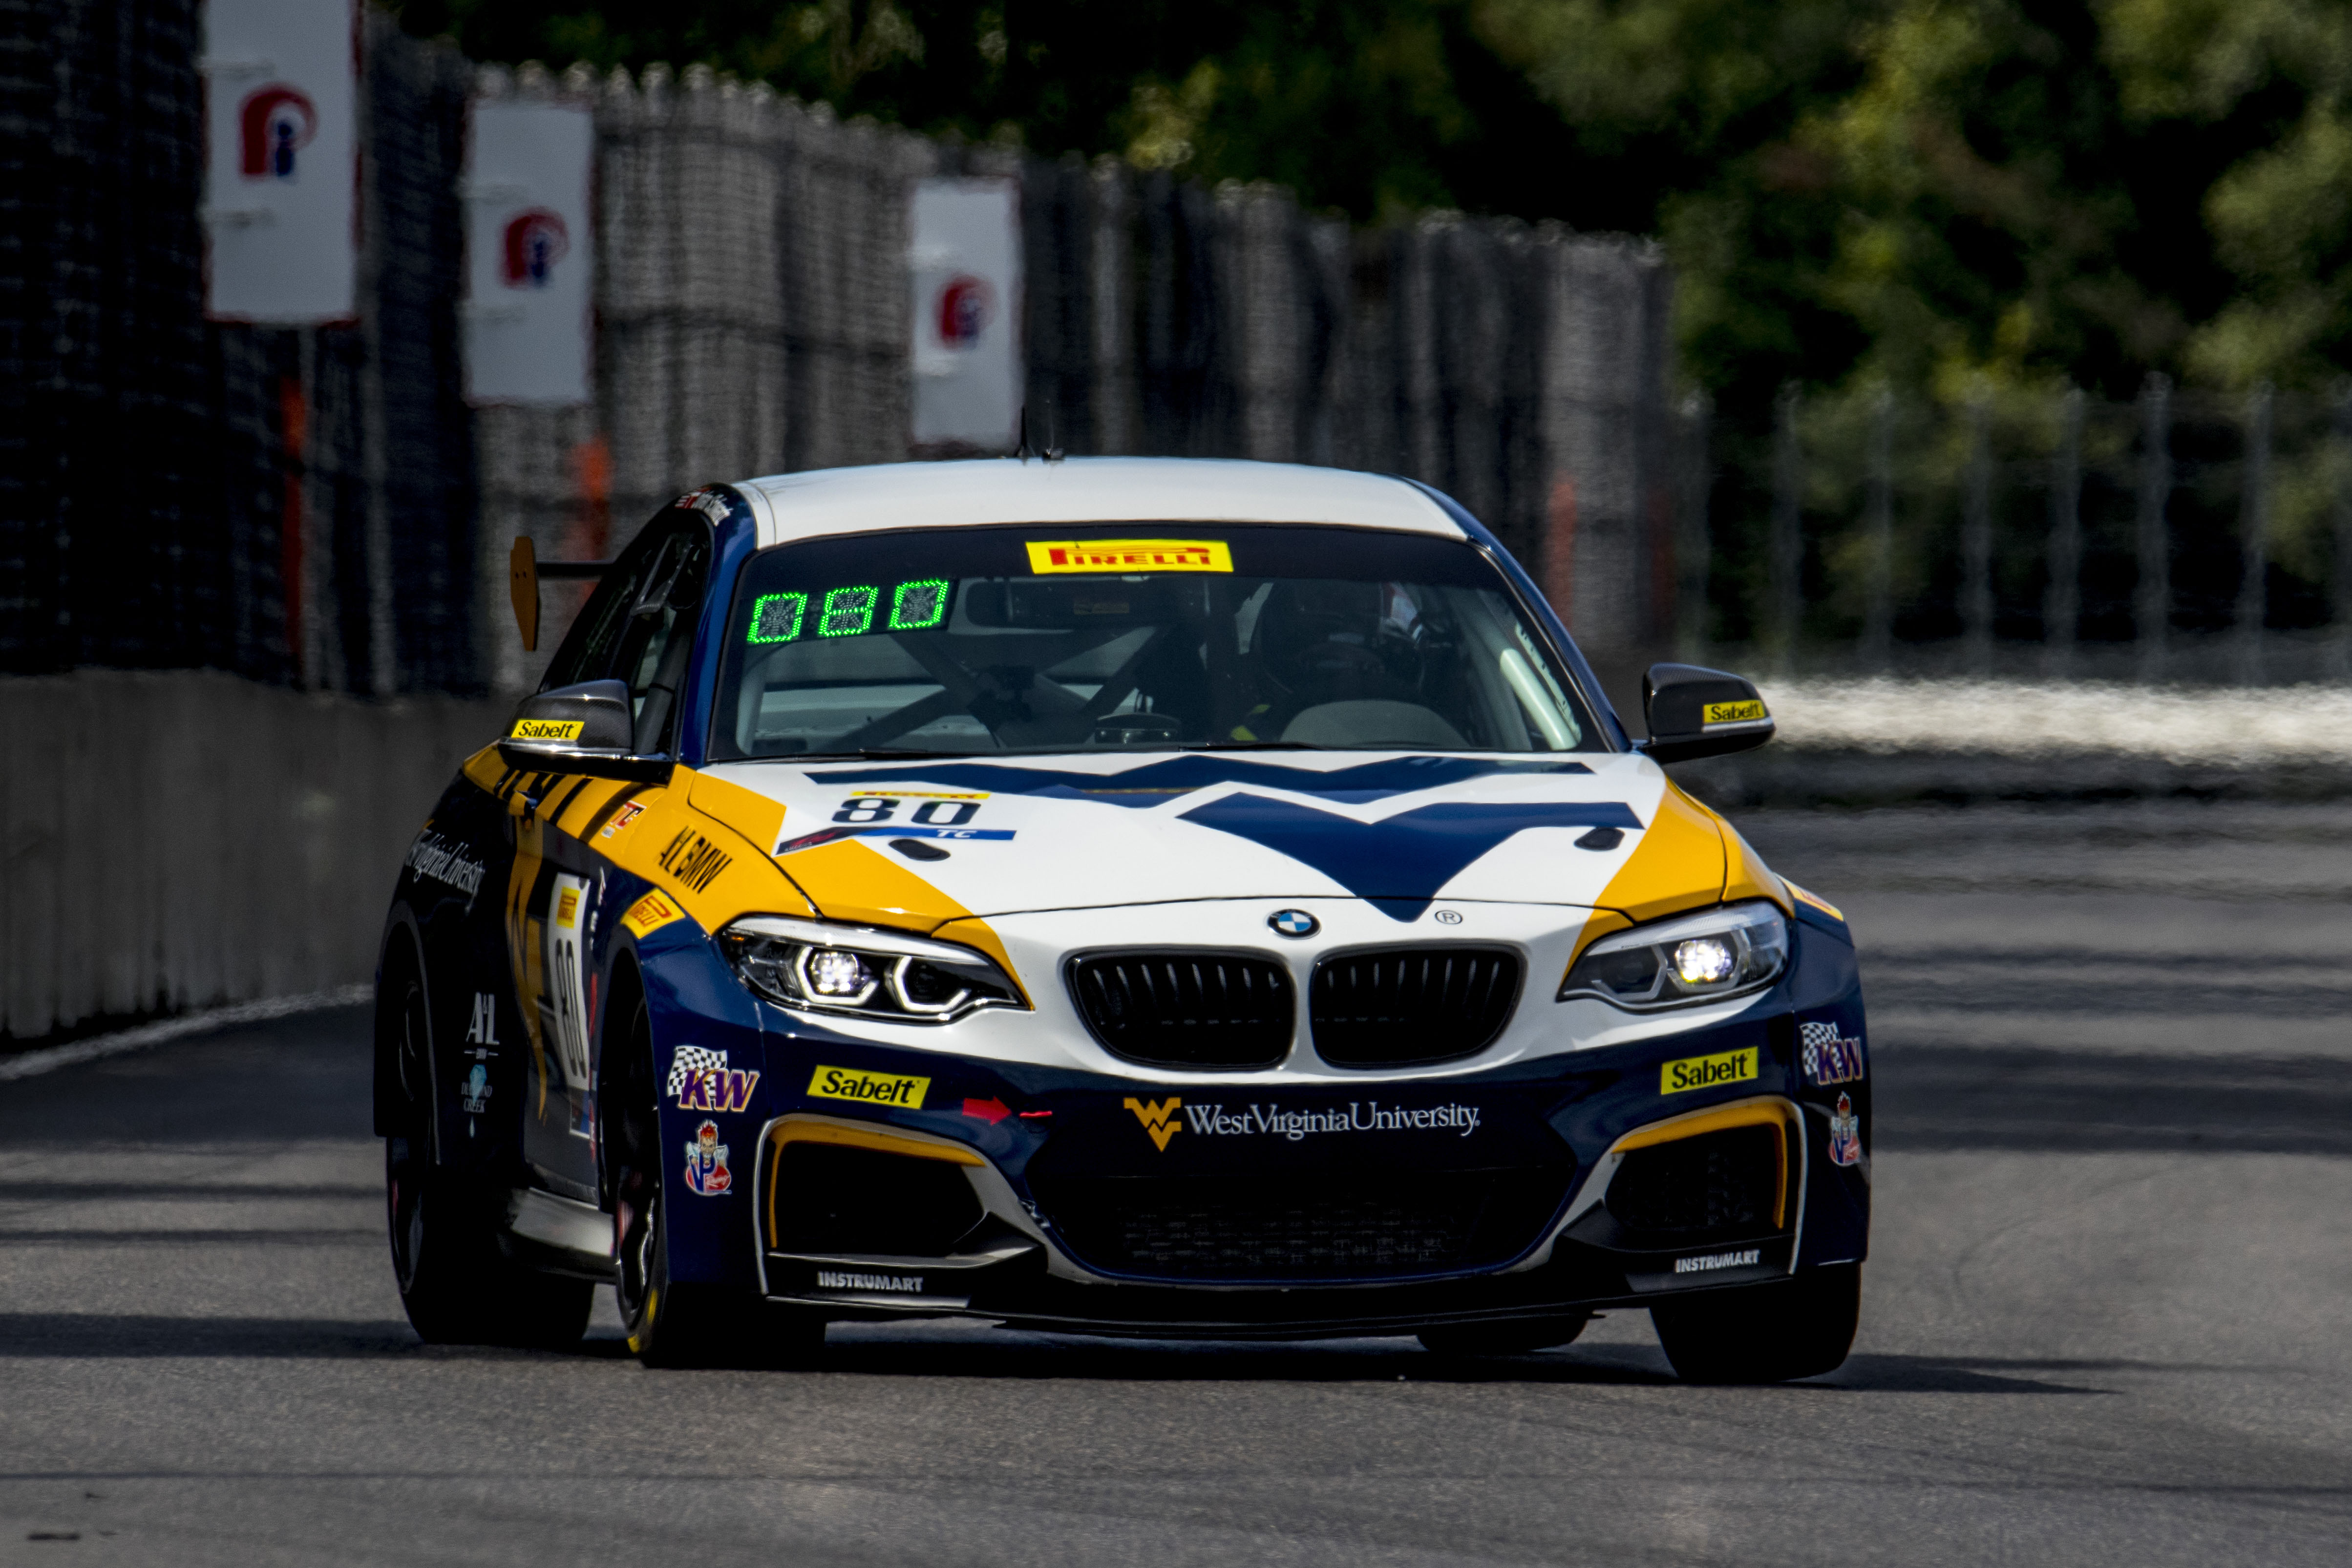 BMW Racers Score Four Wins And A Championship In Portland - BimmerLife